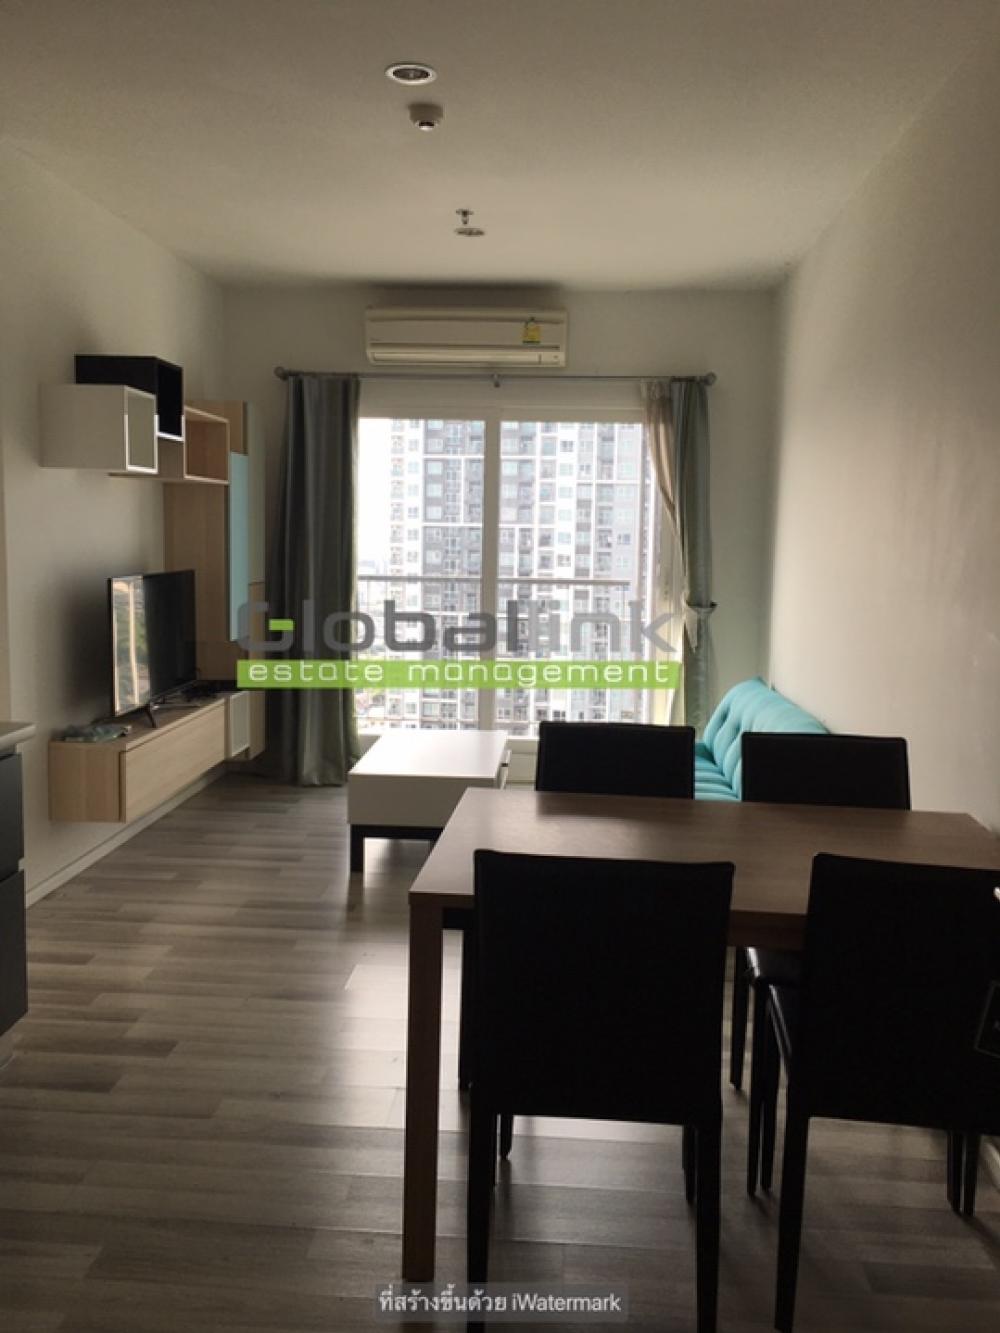 For RentCondoThaphra, Talat Phlu, Wutthakat : ( GBL1712 ) #Spacious usable area, good price, great value. Condo next to the BTS 🚊 Room For Rent Project name : The key Wutthakat 🔥Hot Price🔥 18,000baht